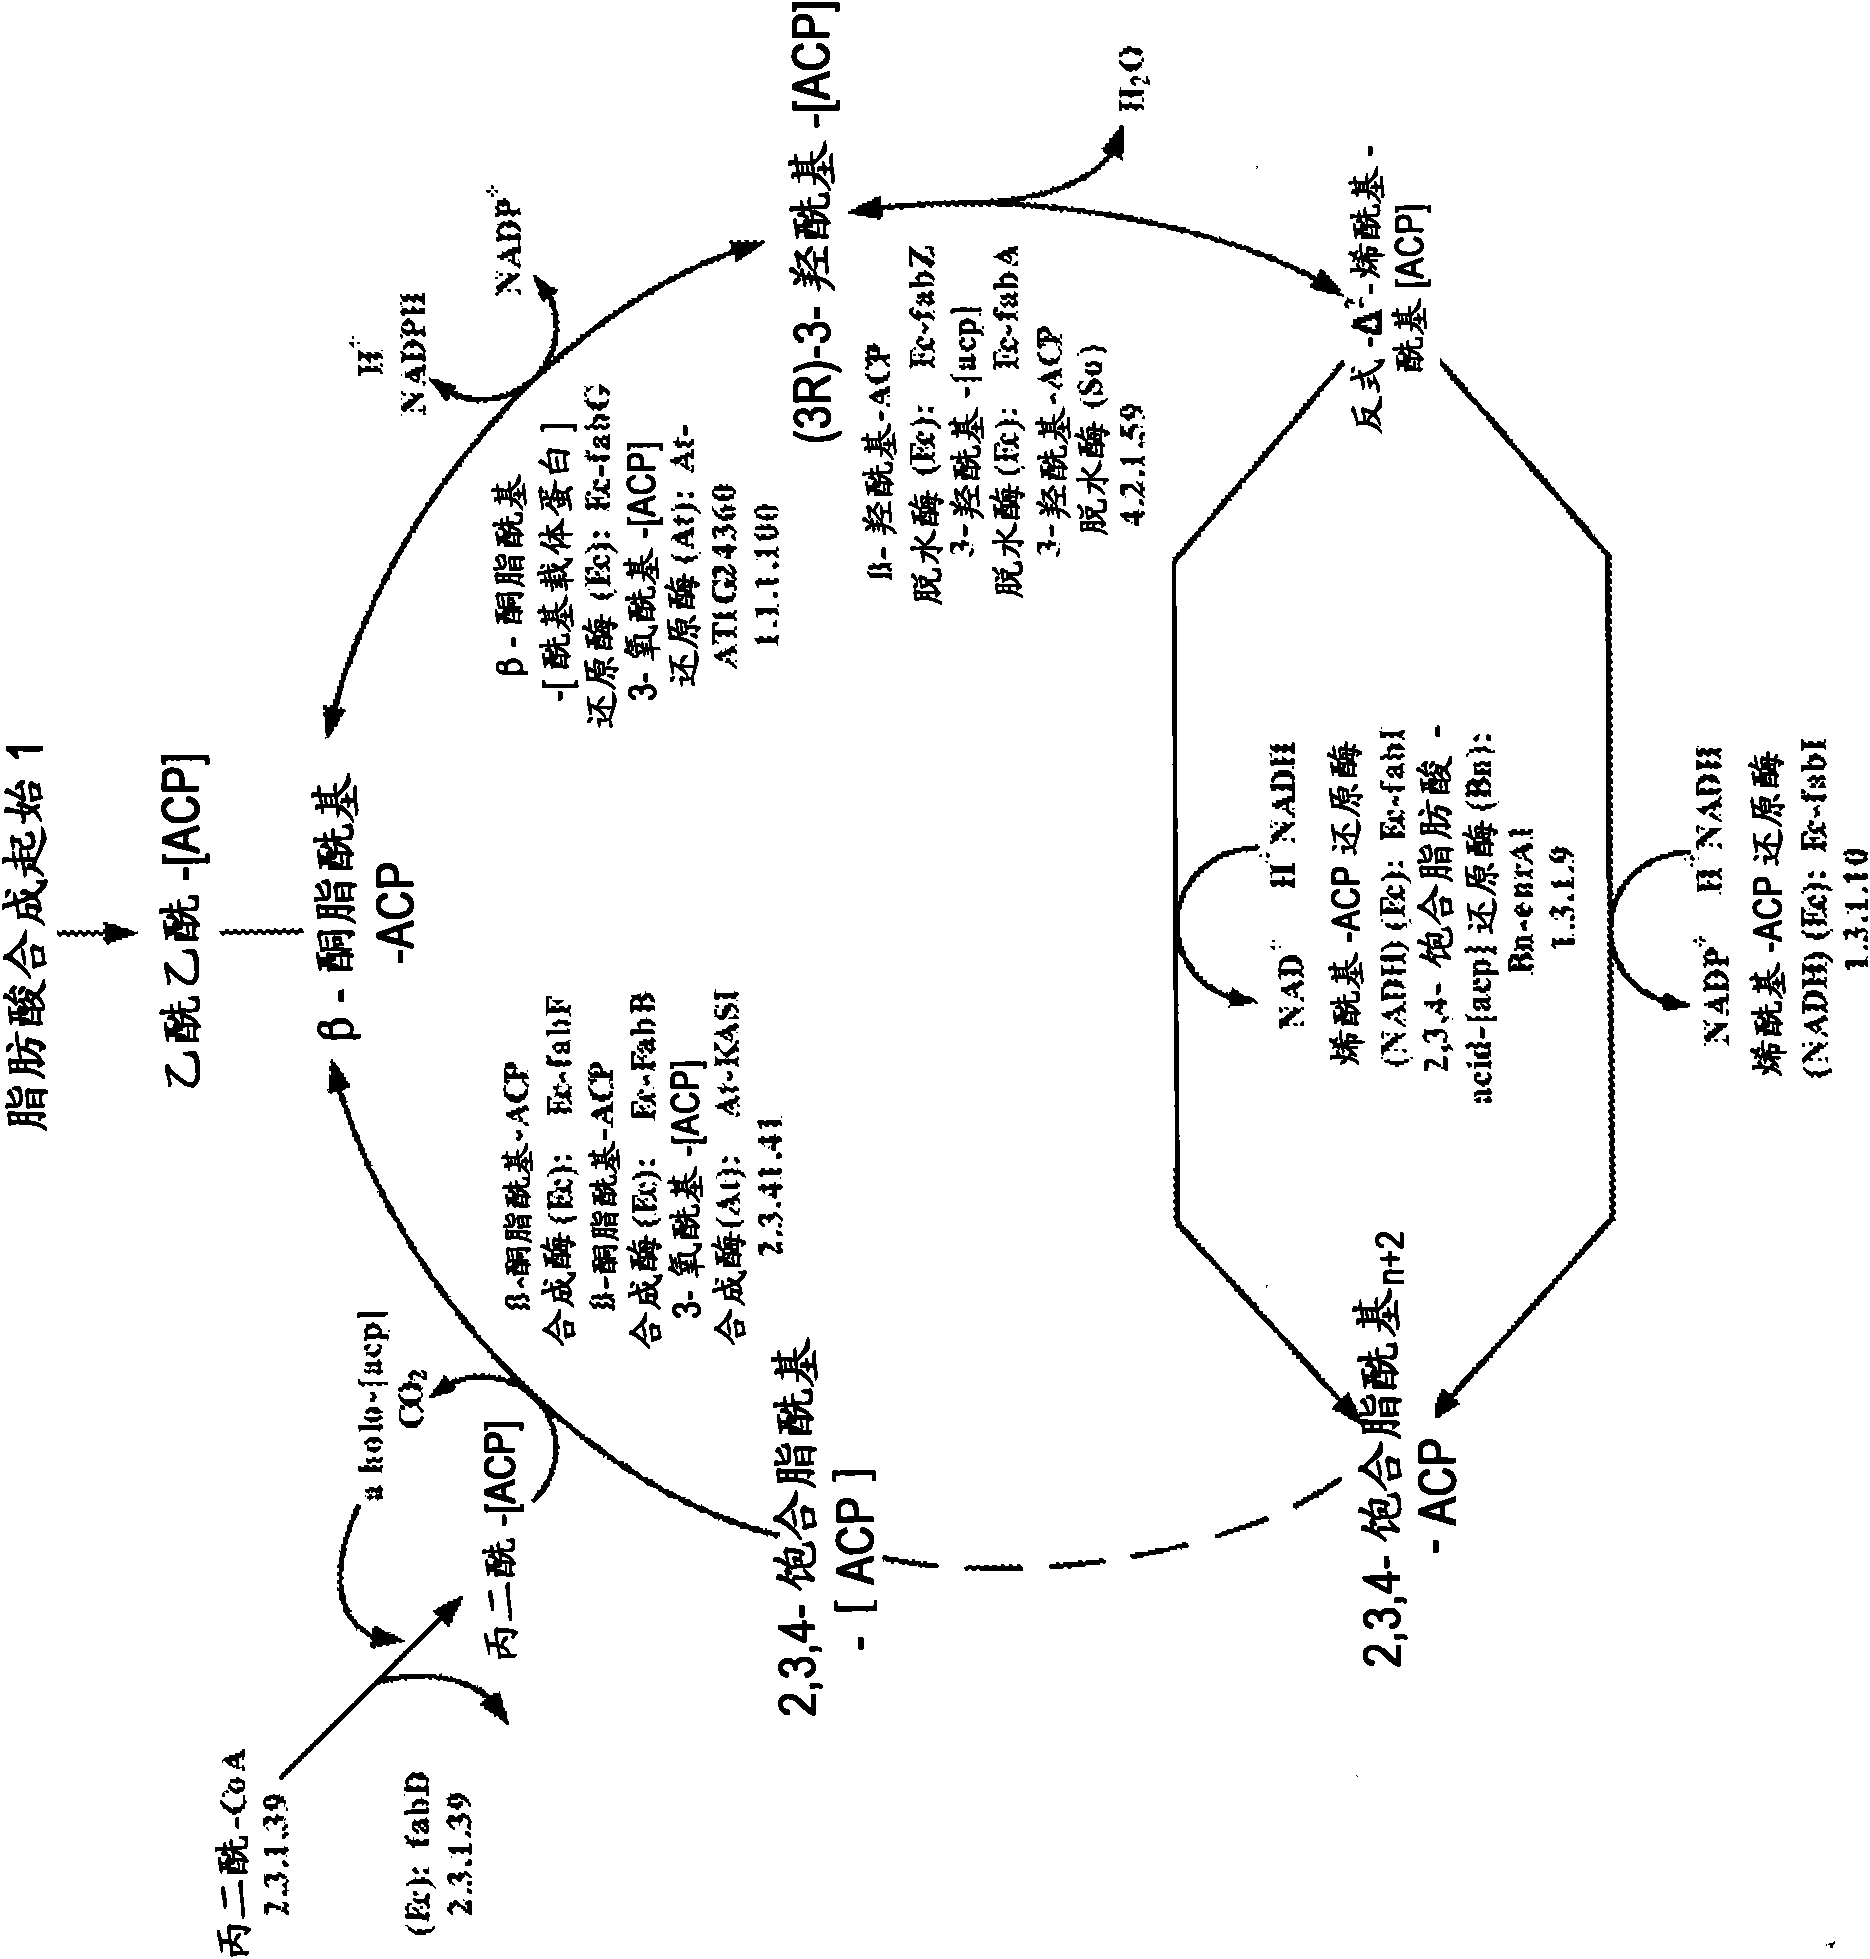 Method for producing 3-hydroxypropionic acid and other products